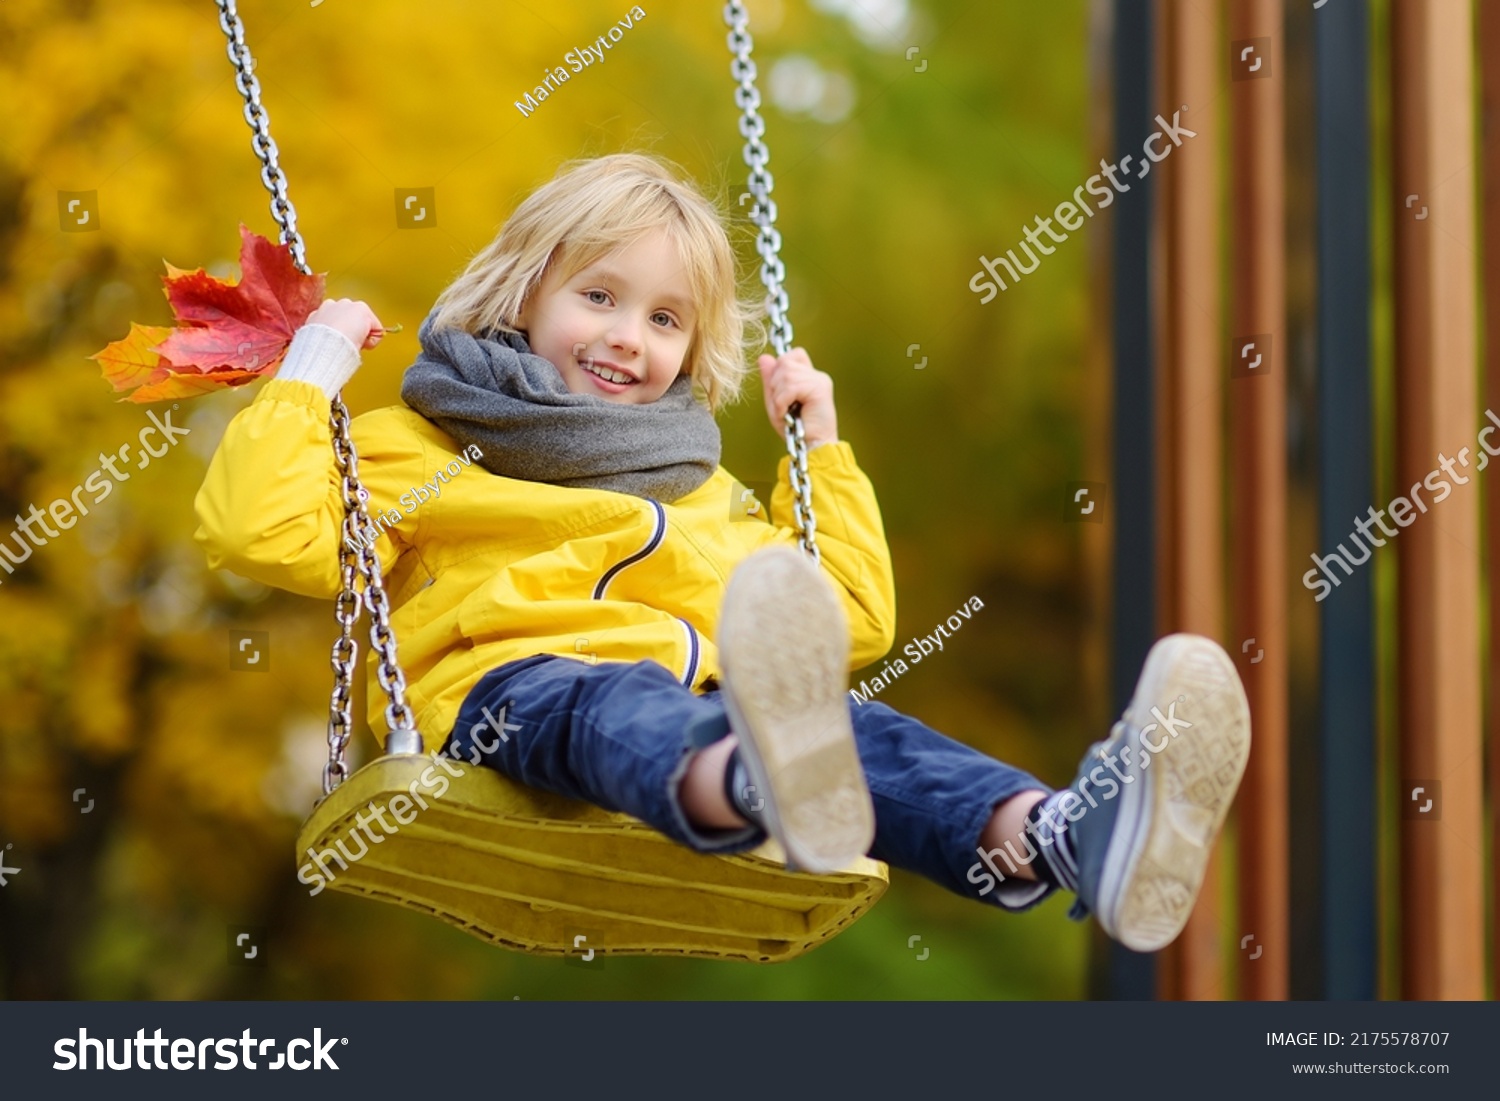 Little boy having fun on a swing on the playground in public park on autumn day. Happy child enjoy swinging. Active outdoors leisure for child in city #2175578707